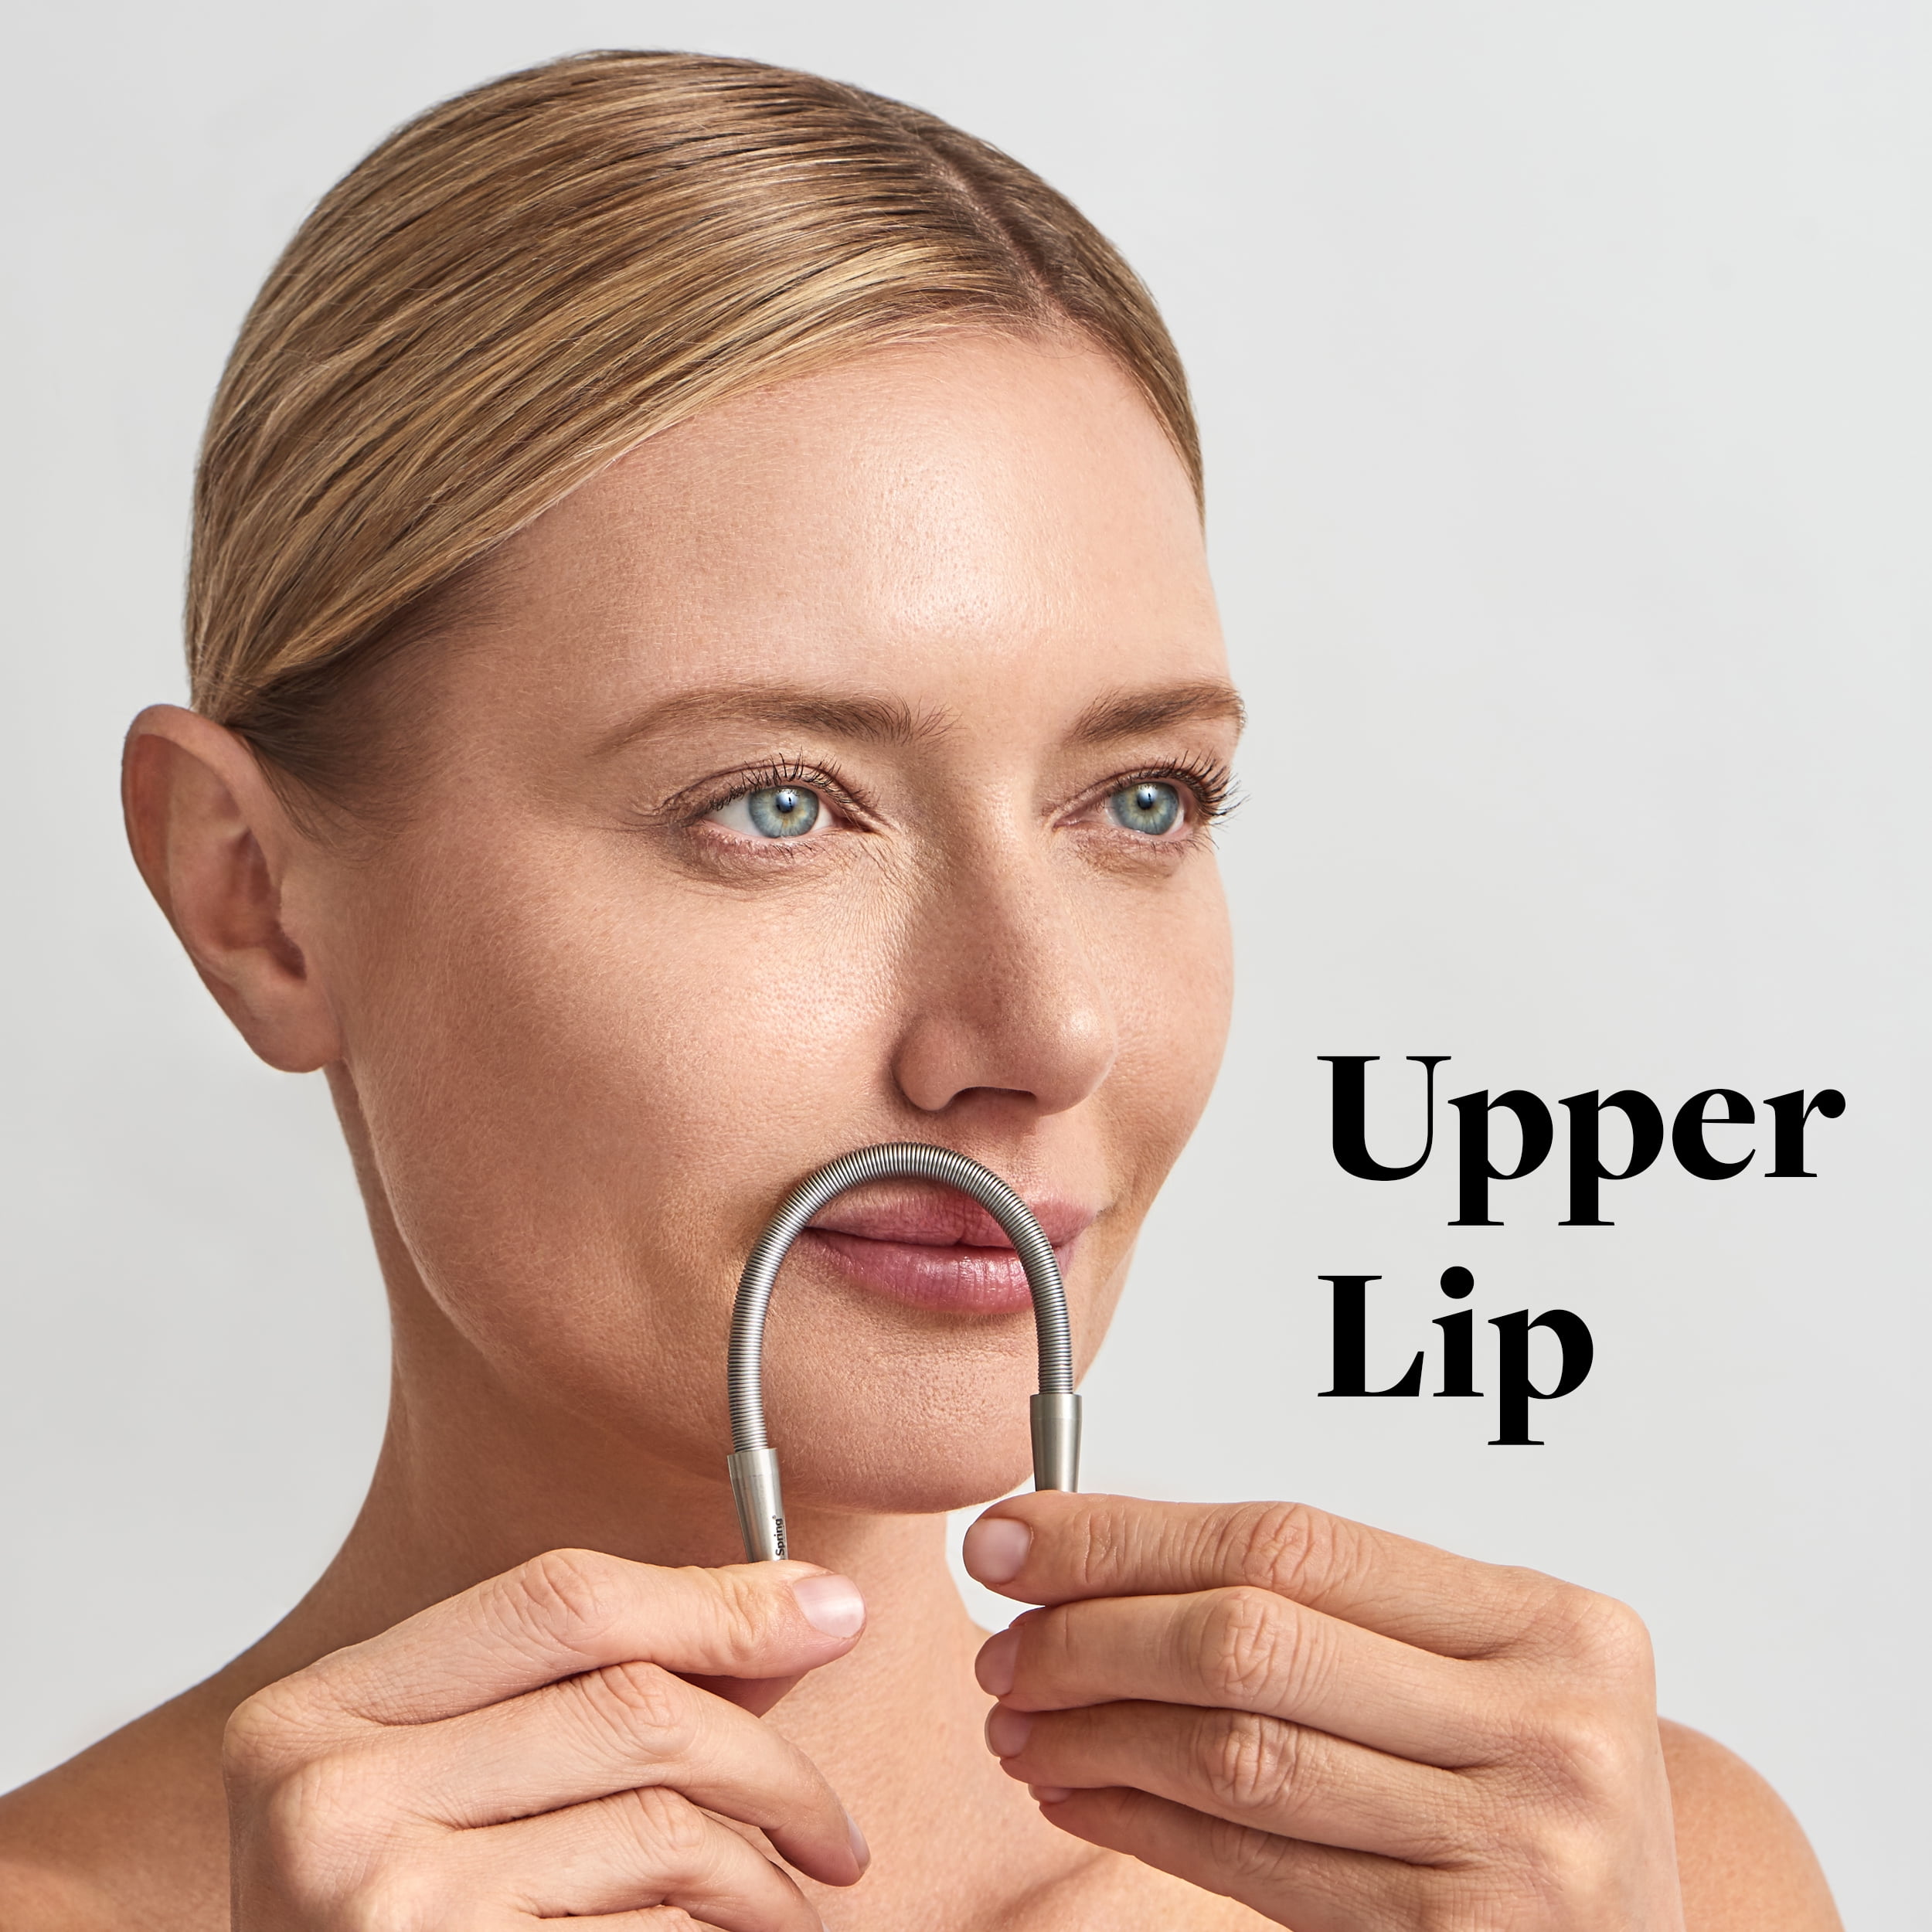  Spring Facial Hair Remover - The Original Hair Removal Spring [Design  Patent]. Removes Hair from Upper Lip, Chin, Cheeks and Neck. 100% Stainless  Steel. 